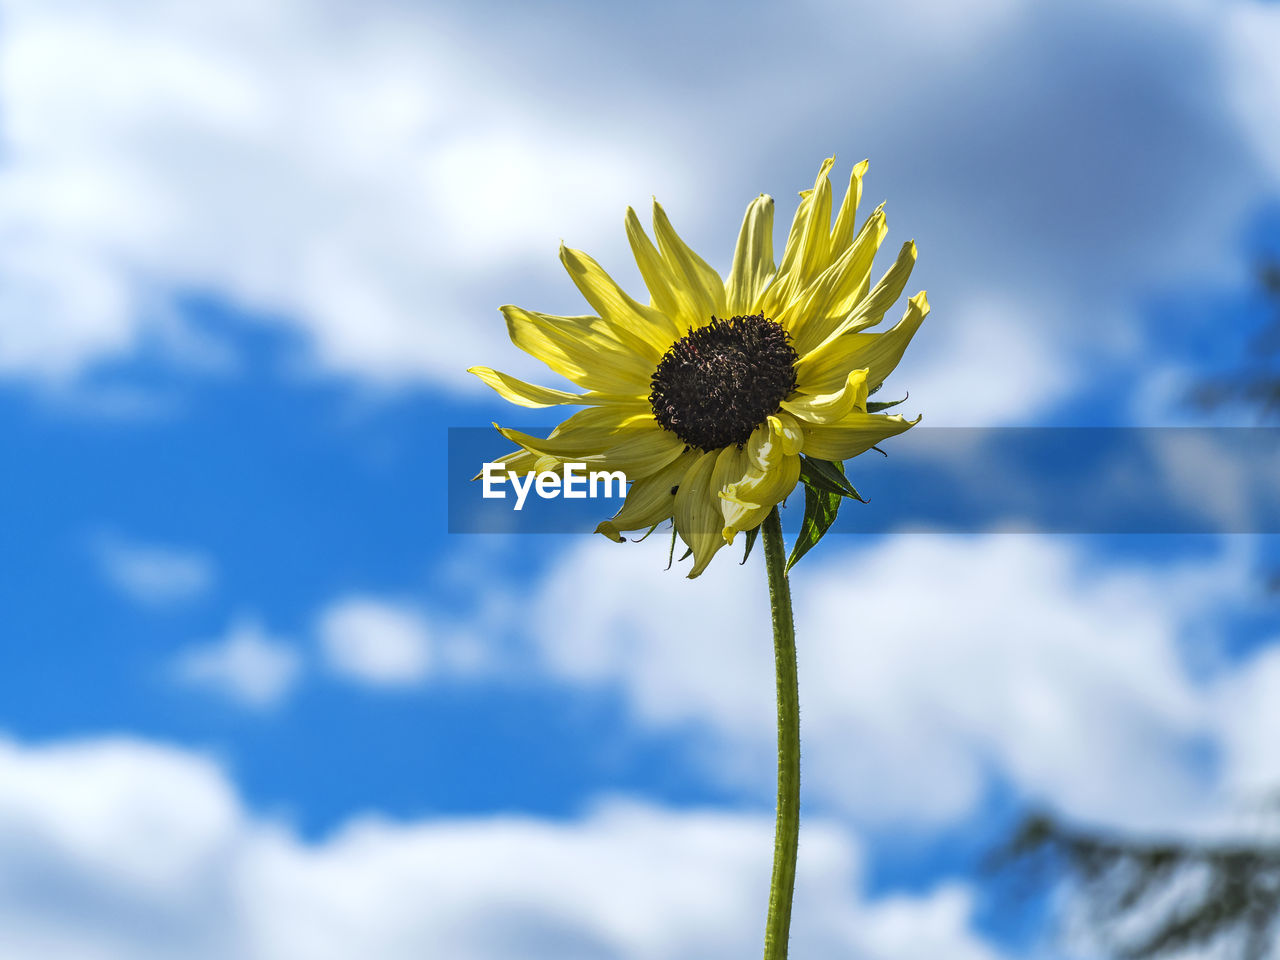 flower, flowering plant, plant, freshness, beauty in nature, cloud, sky, yellow, flower head, nature, fragility, inflorescence, growth, petal, close-up, blue, field, no people, focus on foreground, springtime, outdoors, low angle view, sunflower, plant stem, environment, sunlight, day, macro photography, summer, vibrant color, landscape, pollen, botany, meadow, copy space, selective focus, sepal, blossom